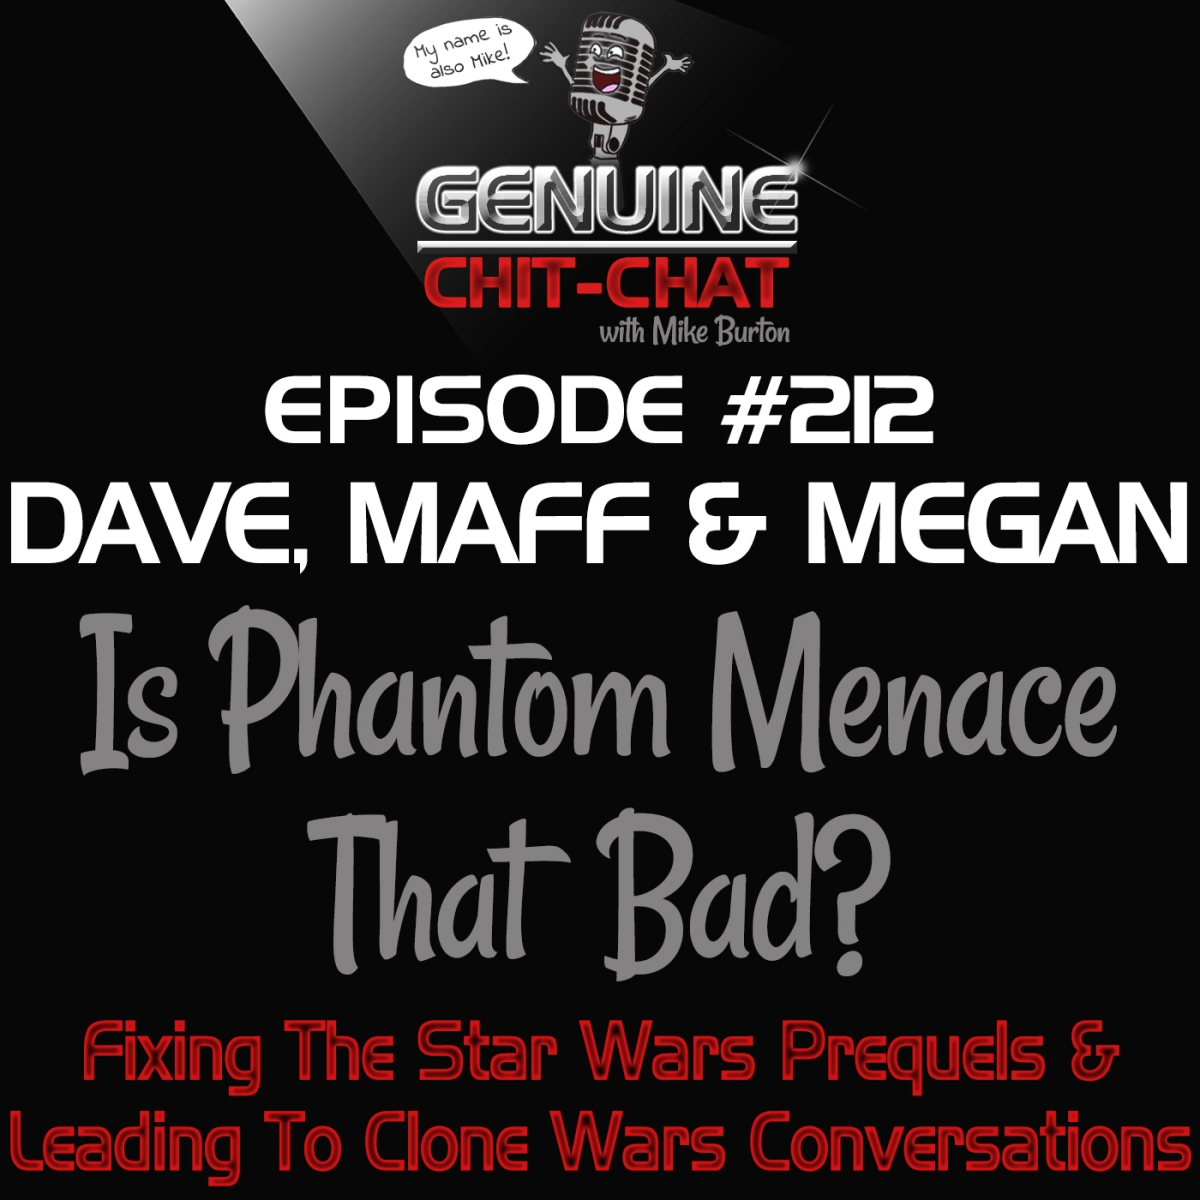 #212 – Is Phantom Menace That Bad? Fixing The Star Wars Prequels & Leading To Clone Wars Conversations With Dave, Maff & Megan